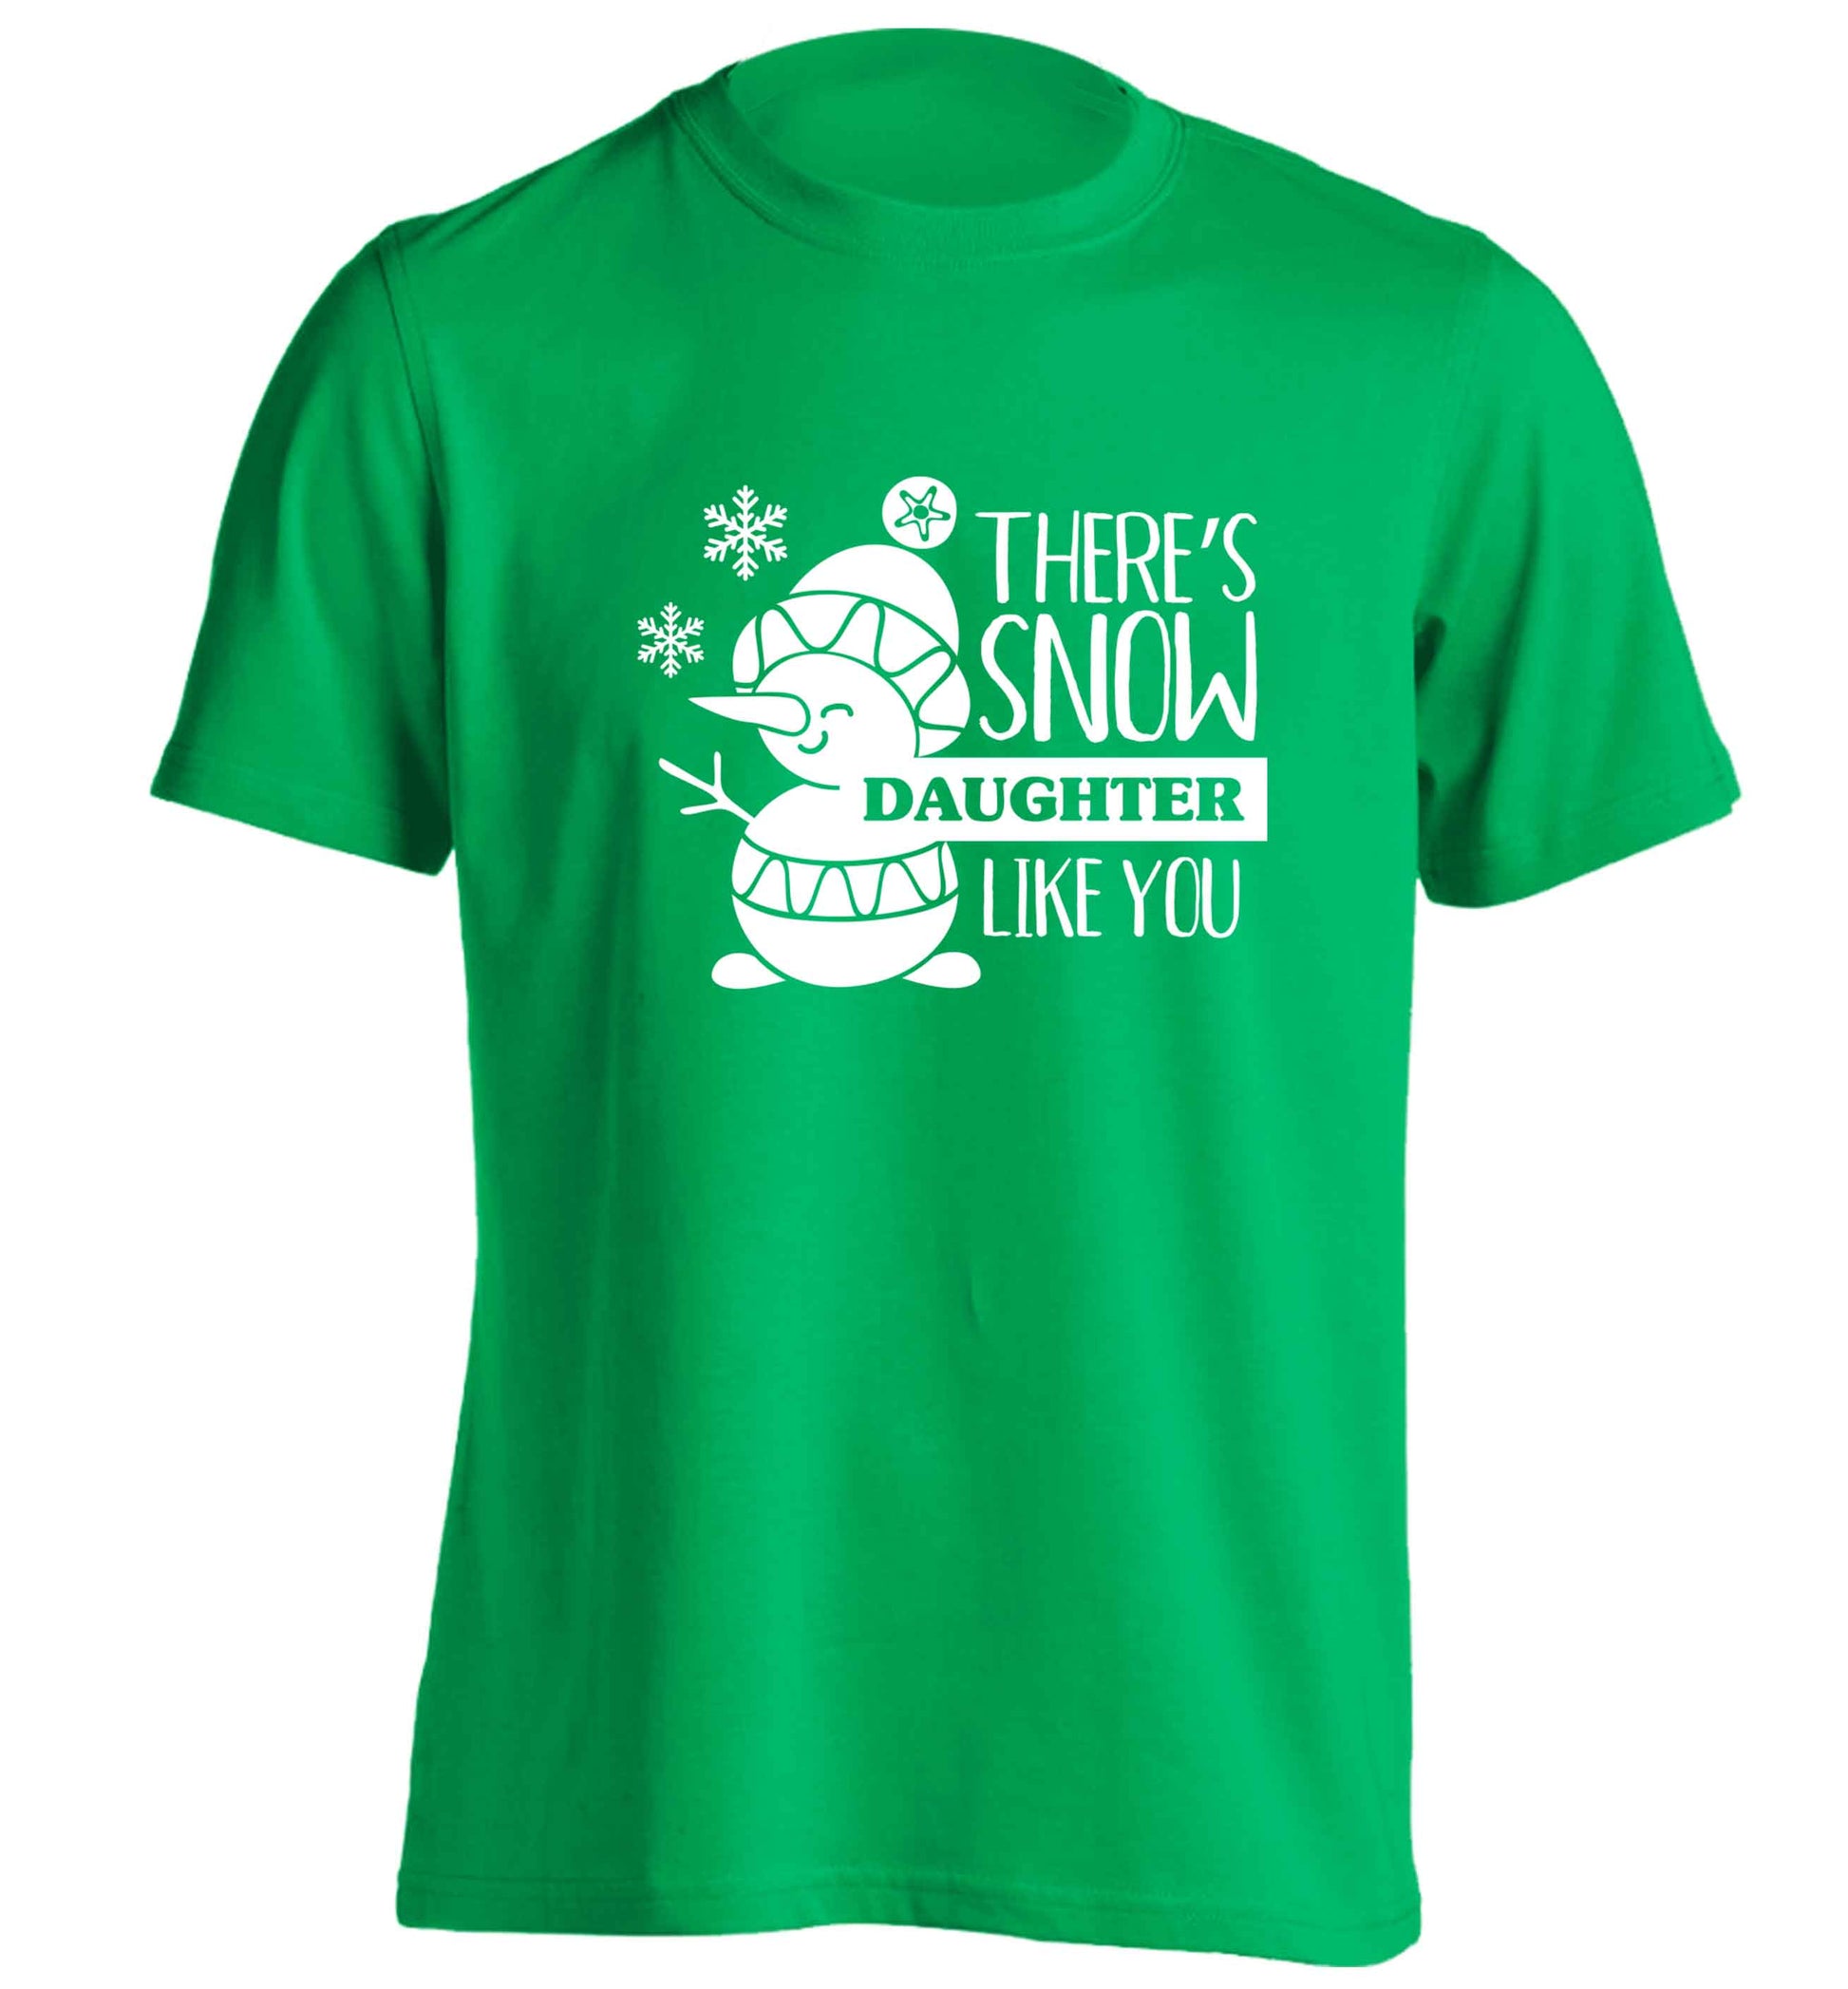 There's snow daughter like you adults unisex green Tshirt 2XL